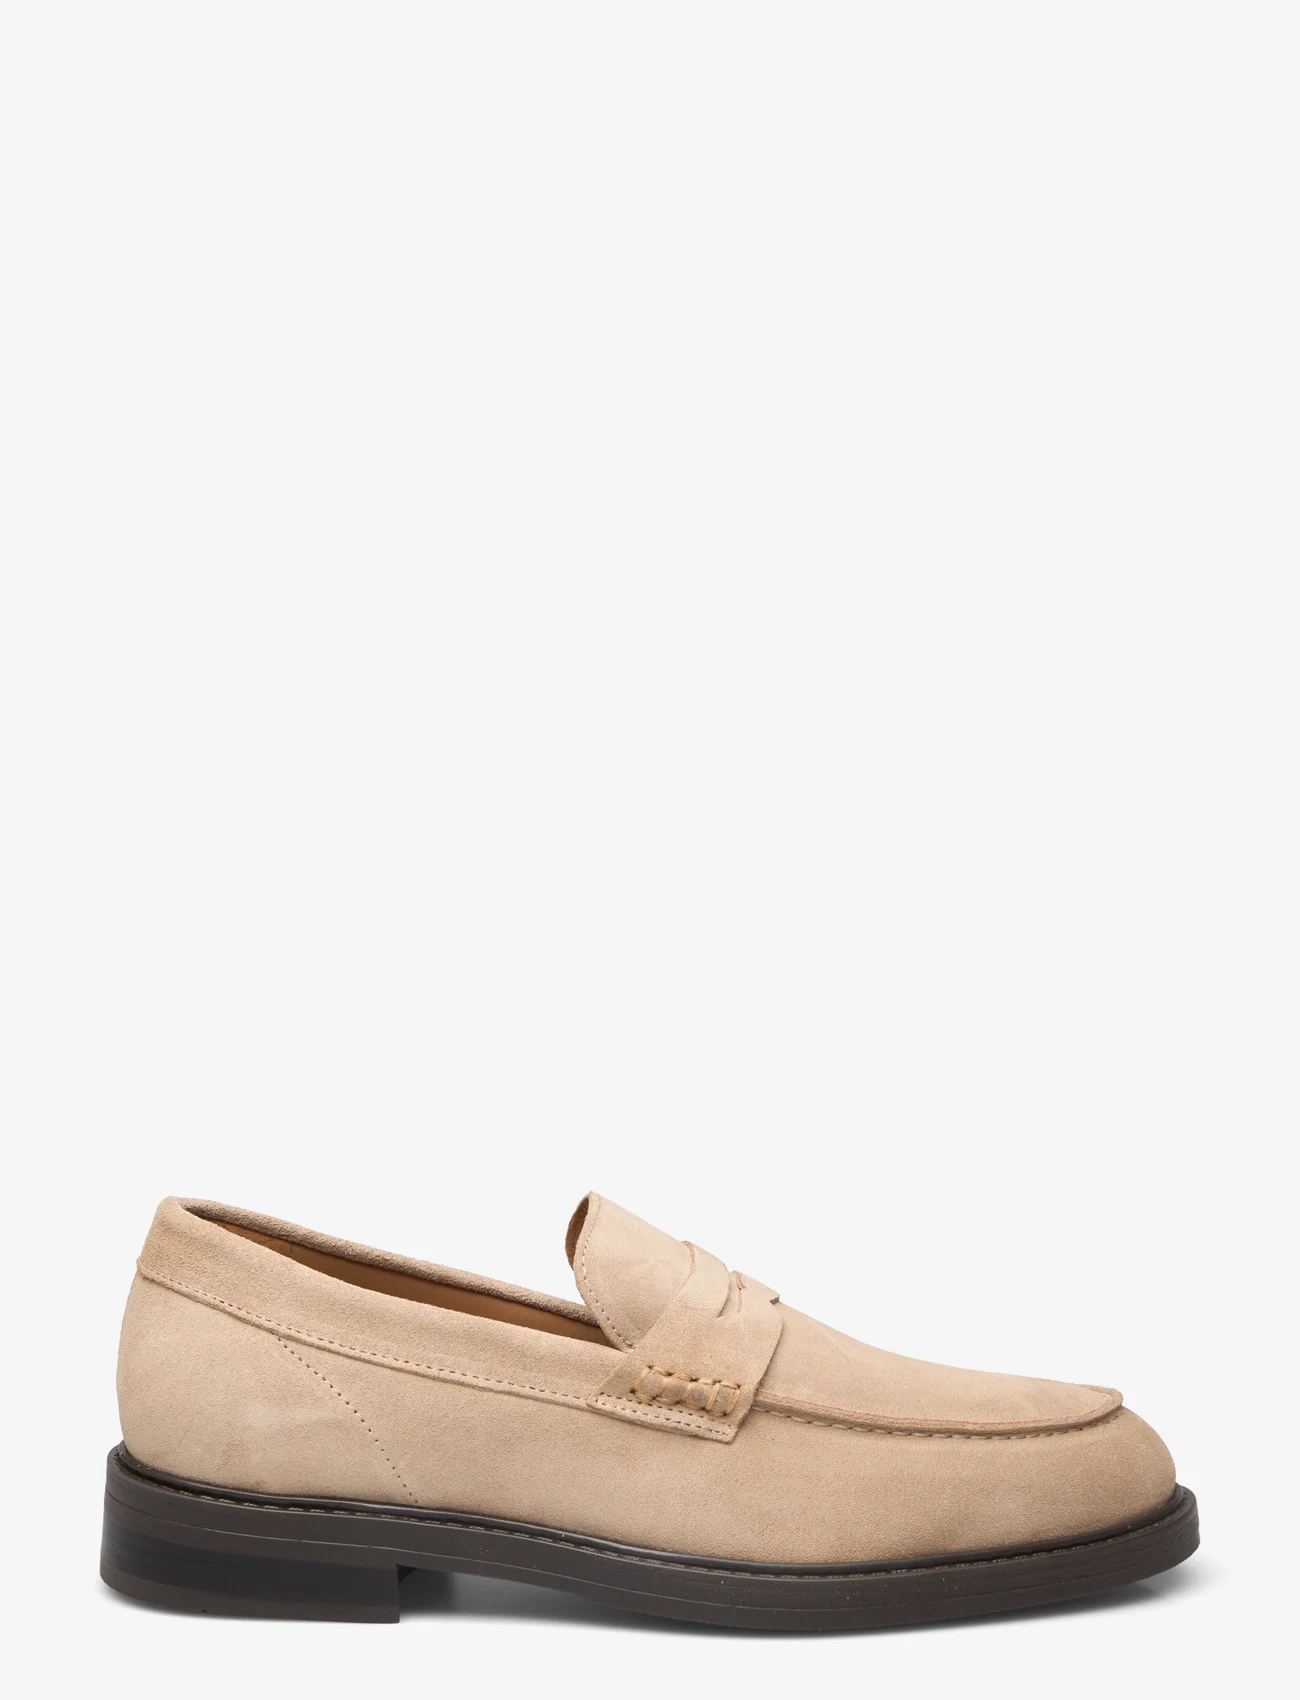 Selected Homme - SLHBLAKE SUEDE PENNY LOAFER - pavasariniai batai - sand - 1